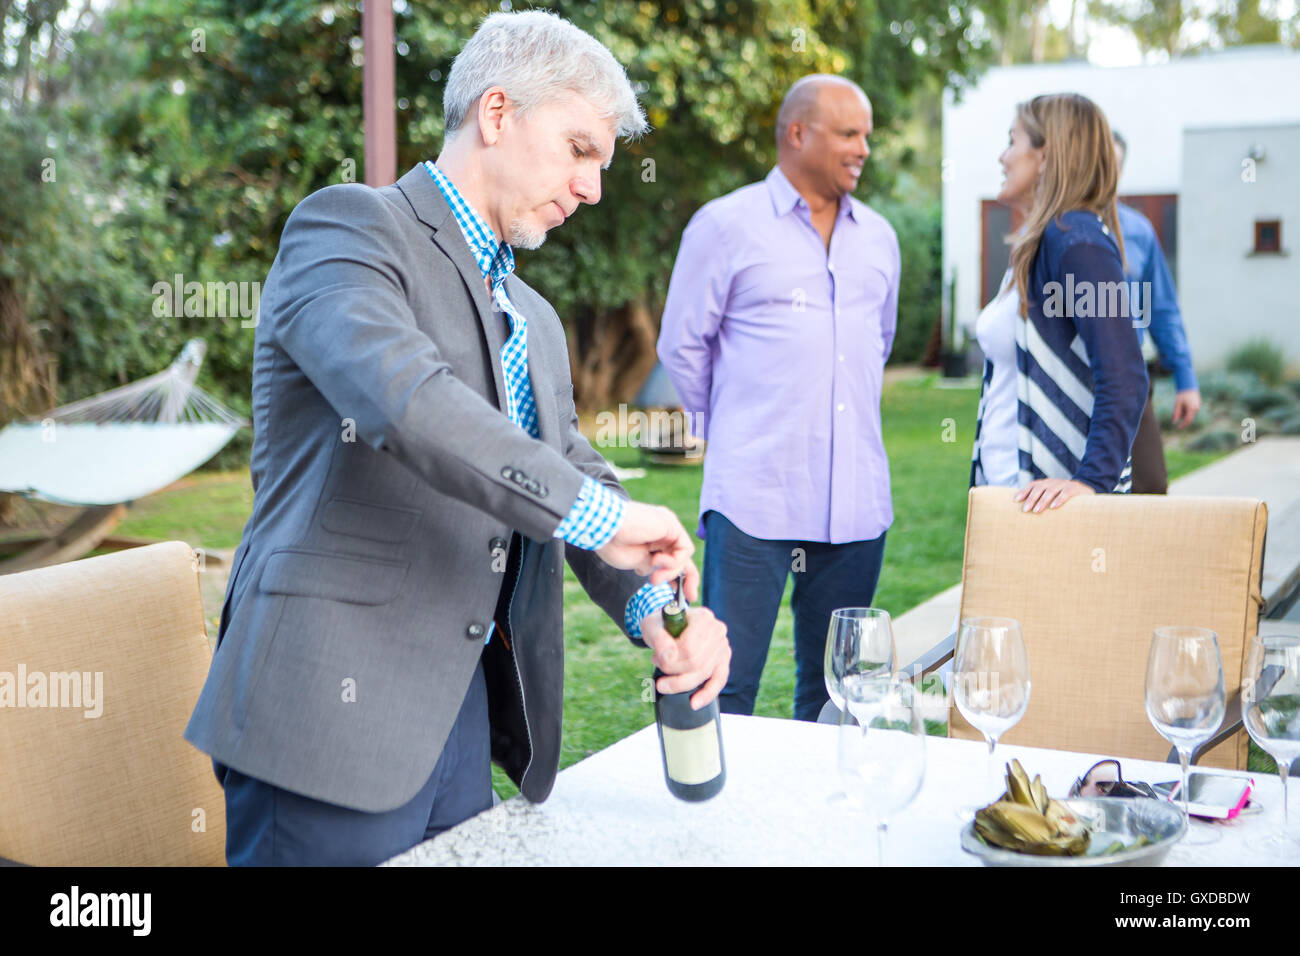 Mature man uncorking wine bottle at garden party table Stock Photo